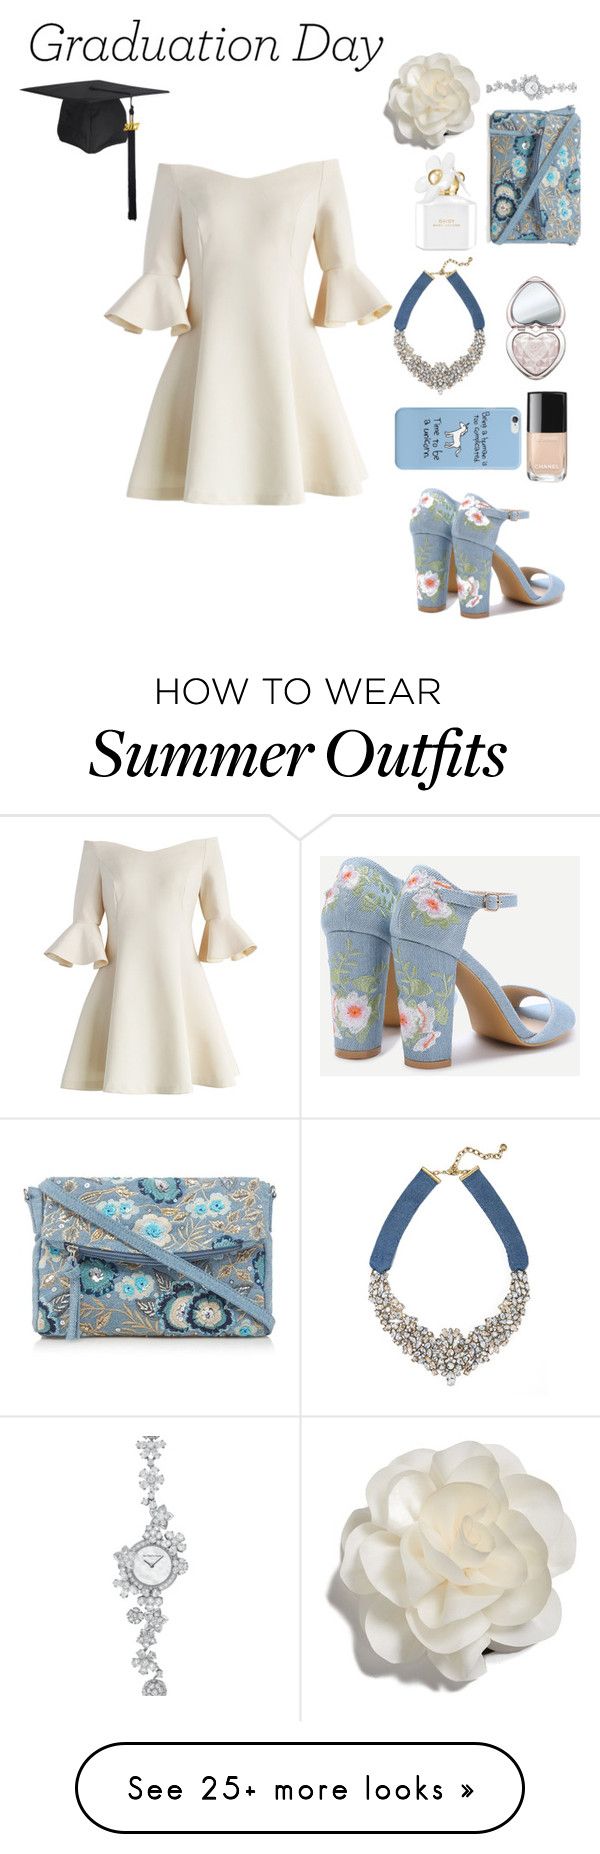 "Graduation Day Outfit" by katiecat-9 on Polyvore featuring Chicwish, ...